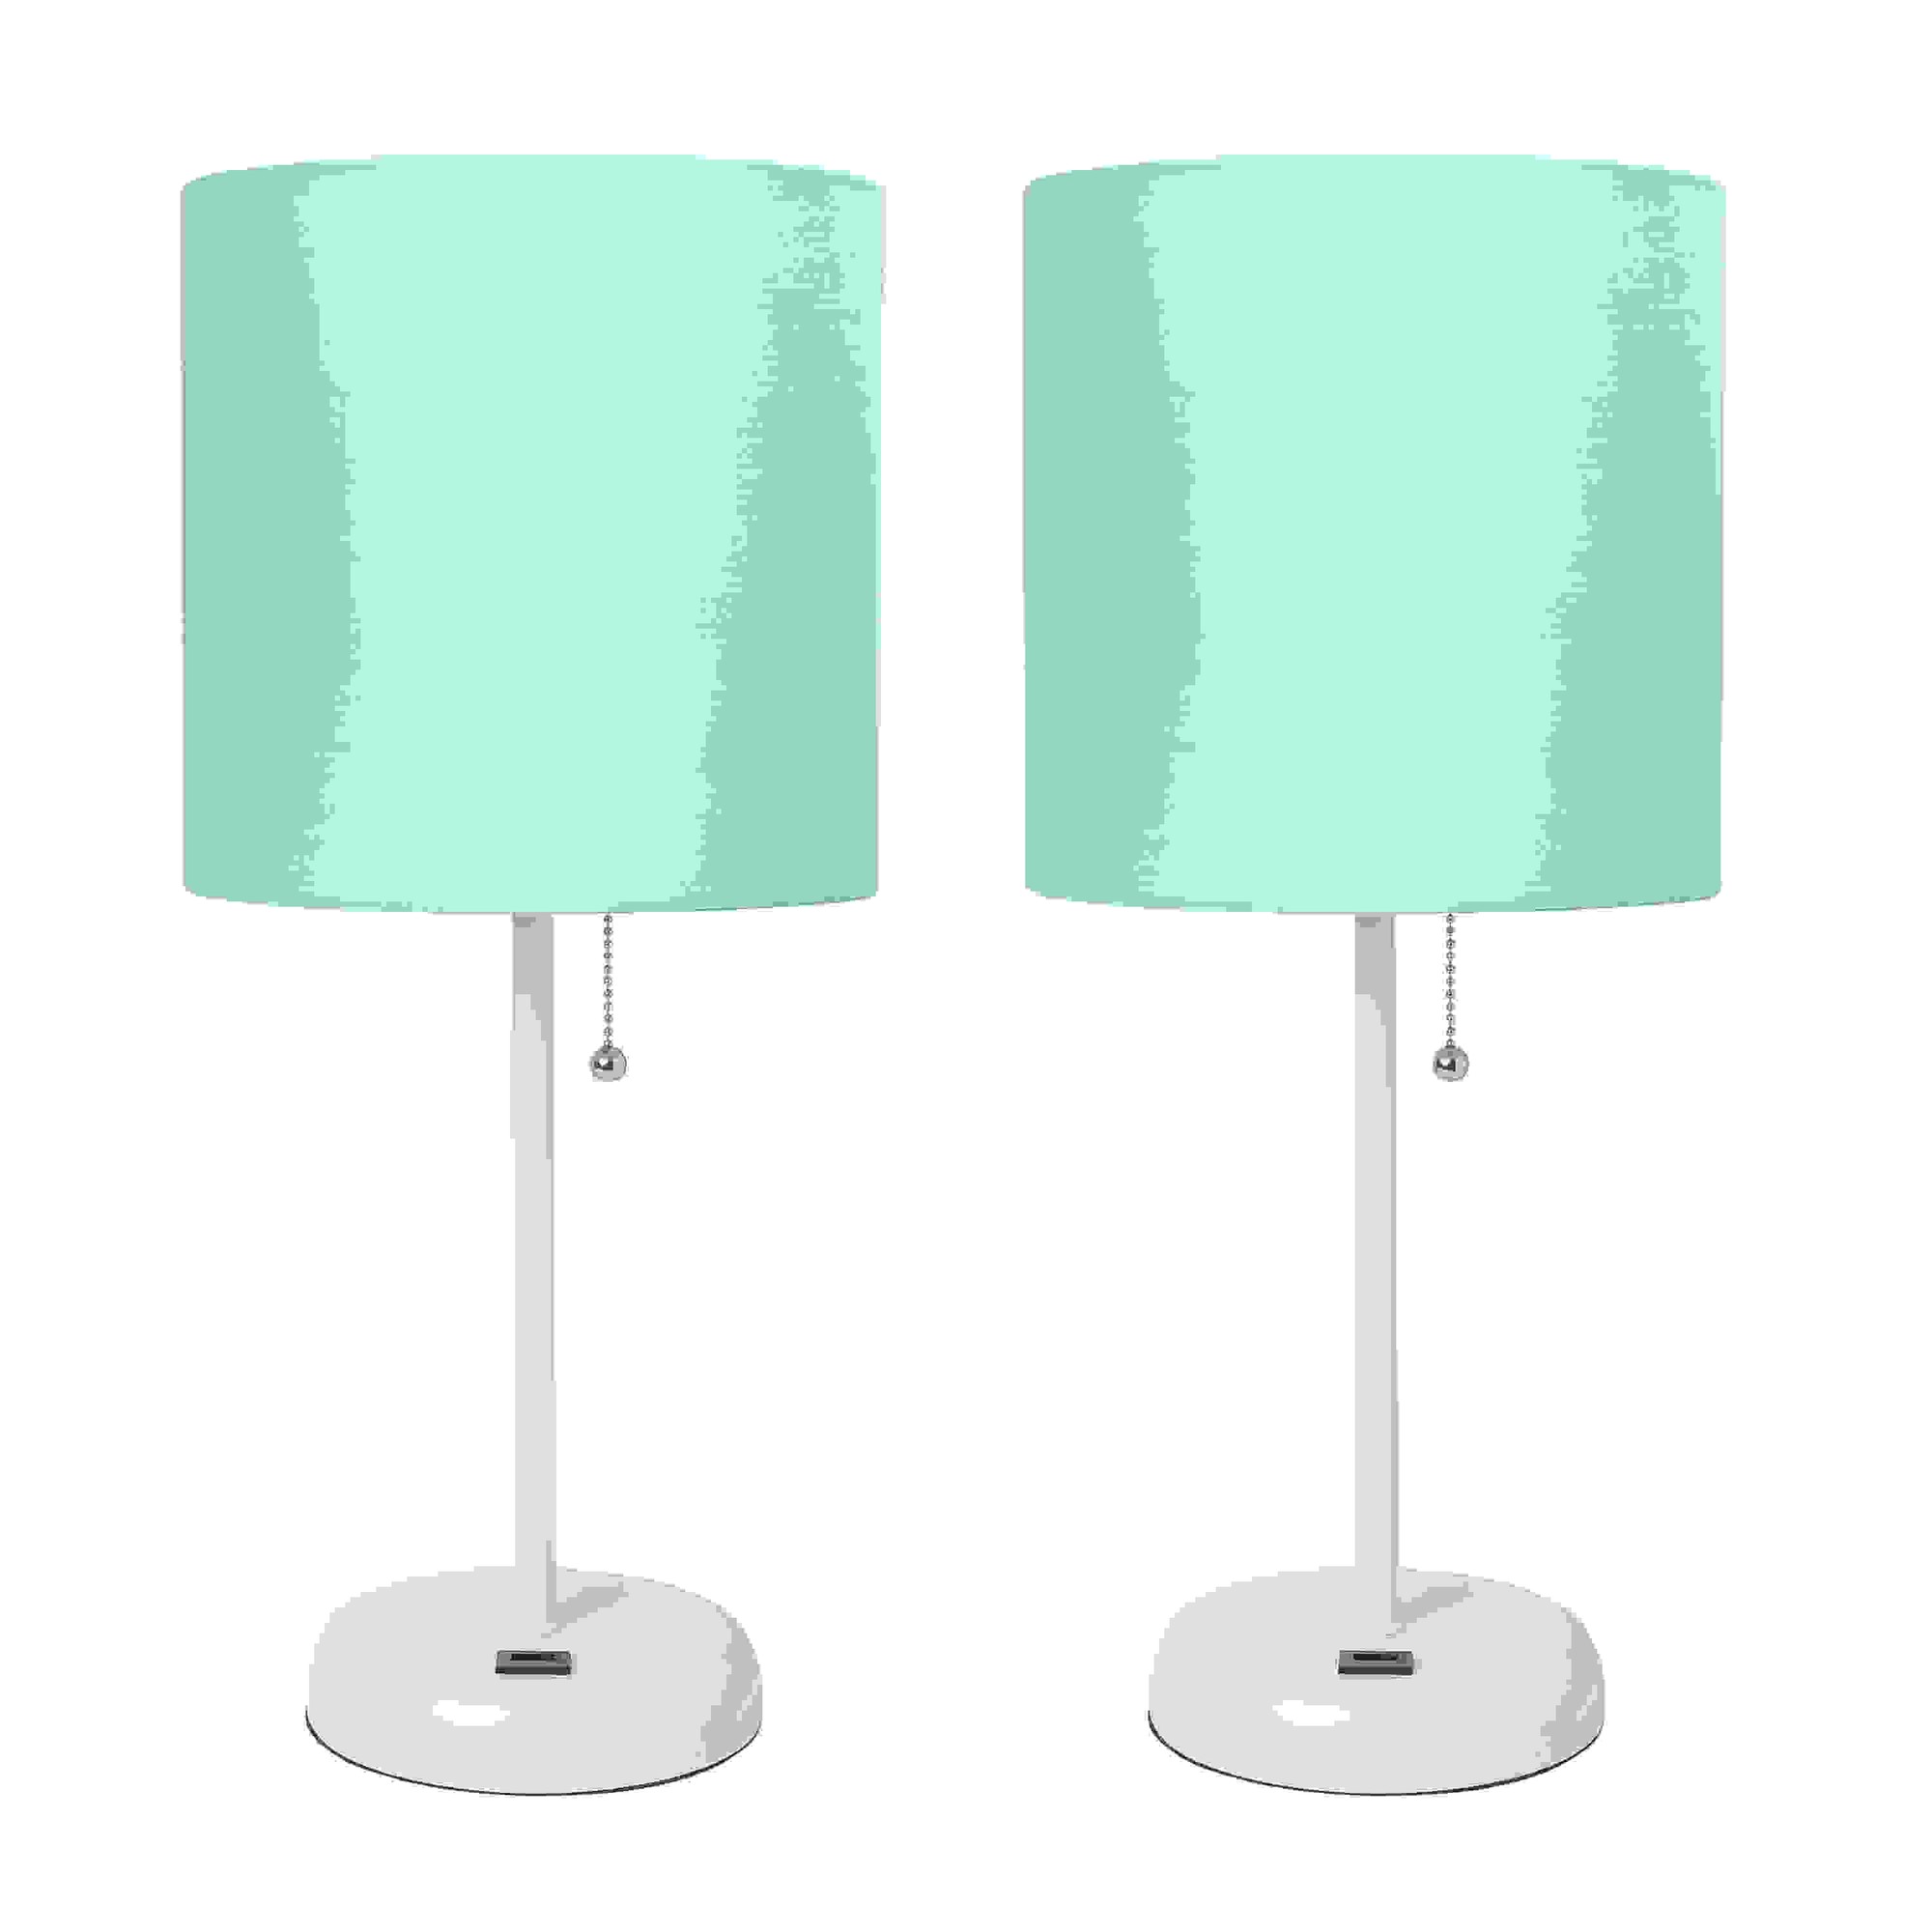 Simple Designs White Stick Lamp with USB charging port and Fabric Shade 2 Pack Set, Aqua